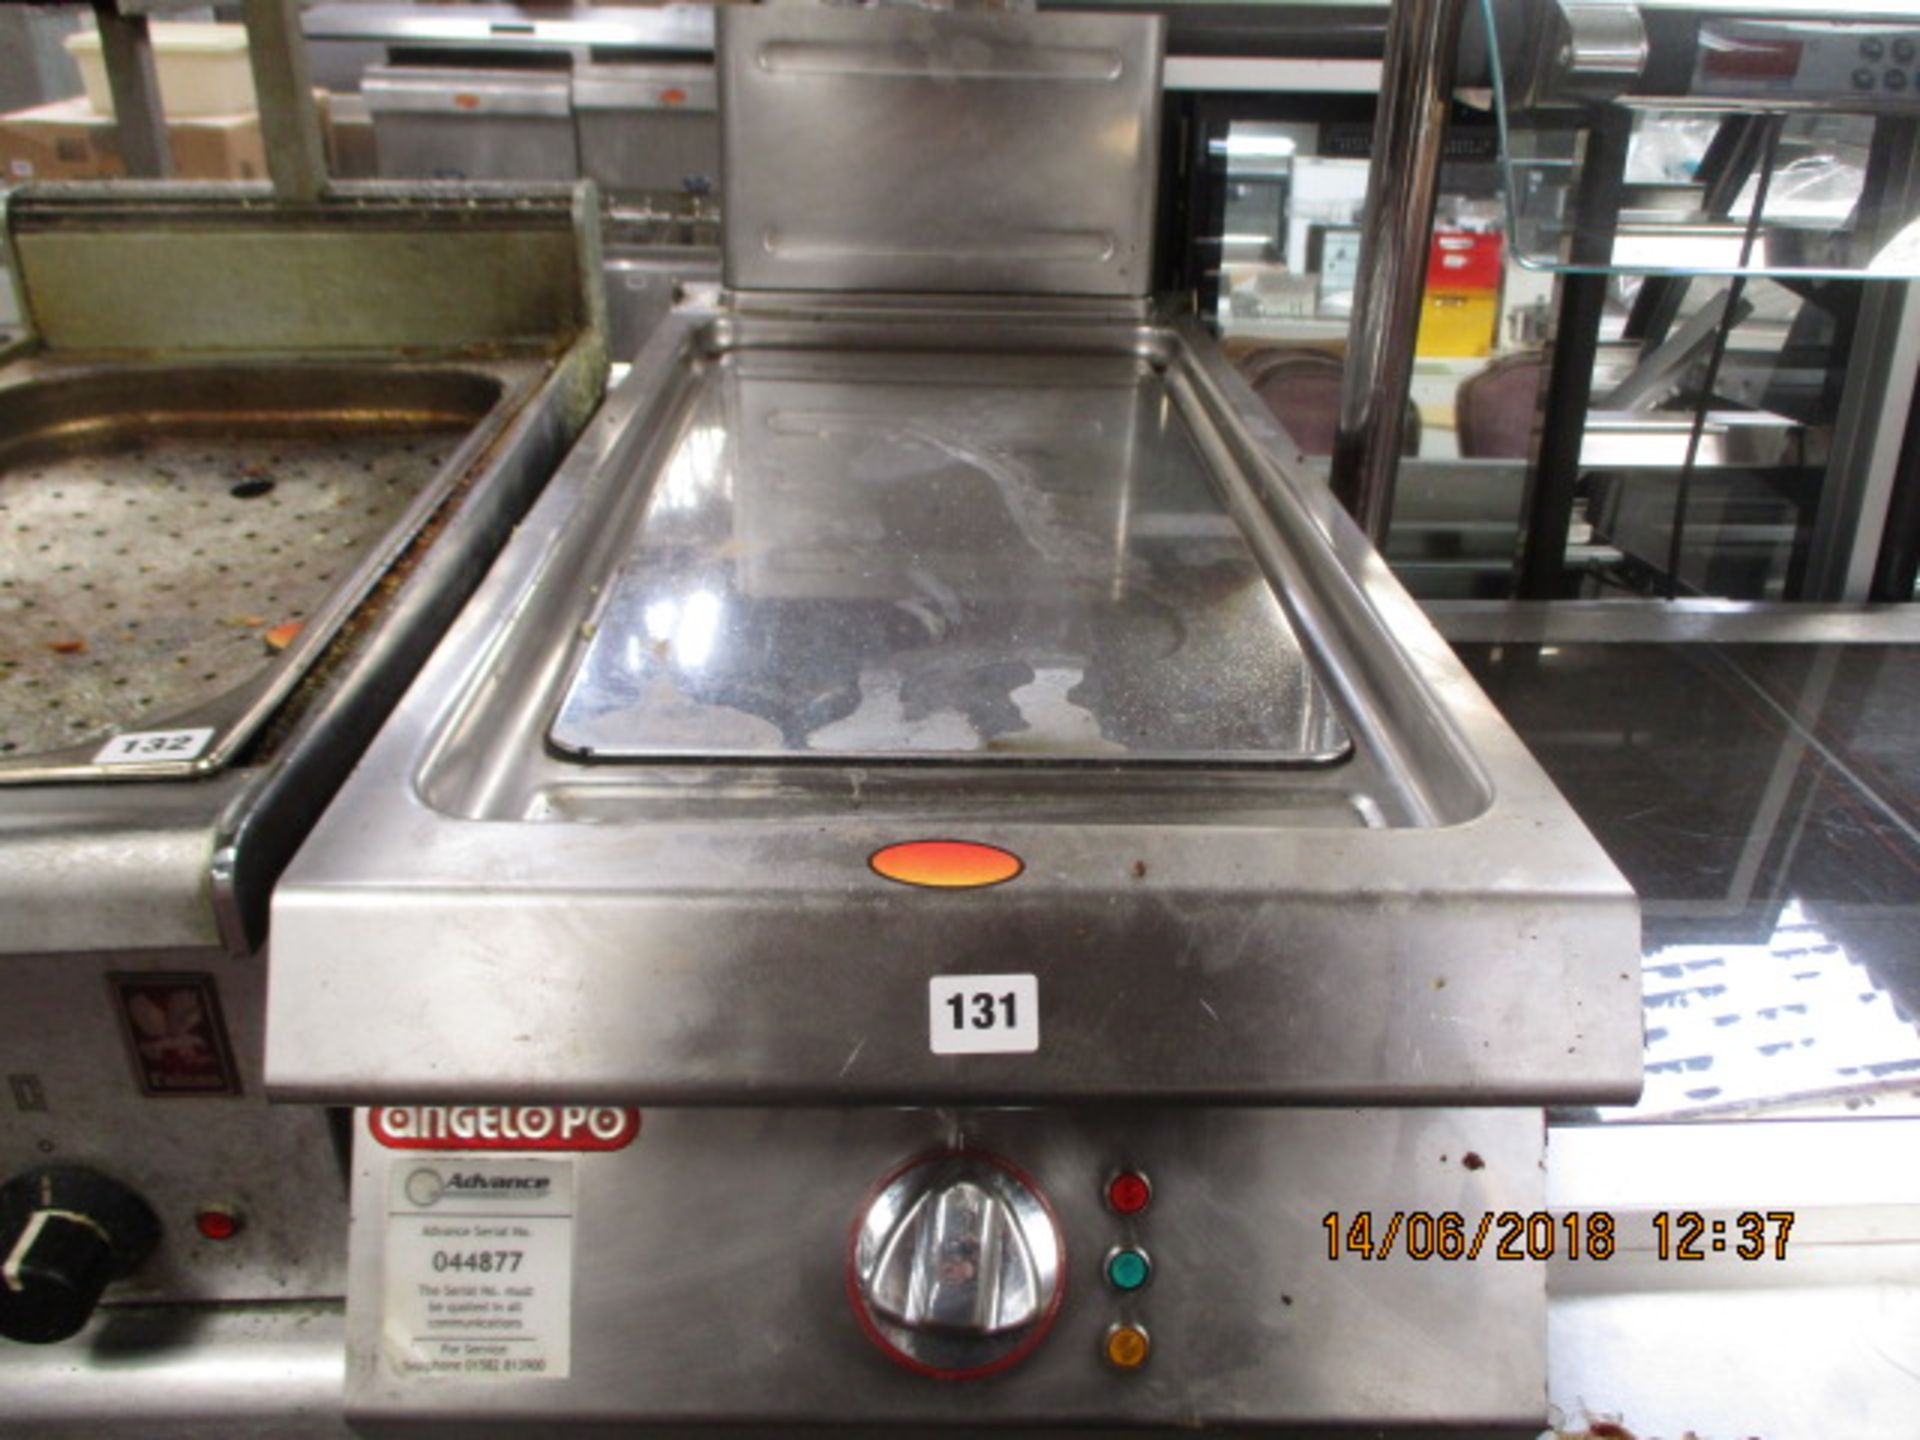 40cm electric Angelo Po flat top griddle